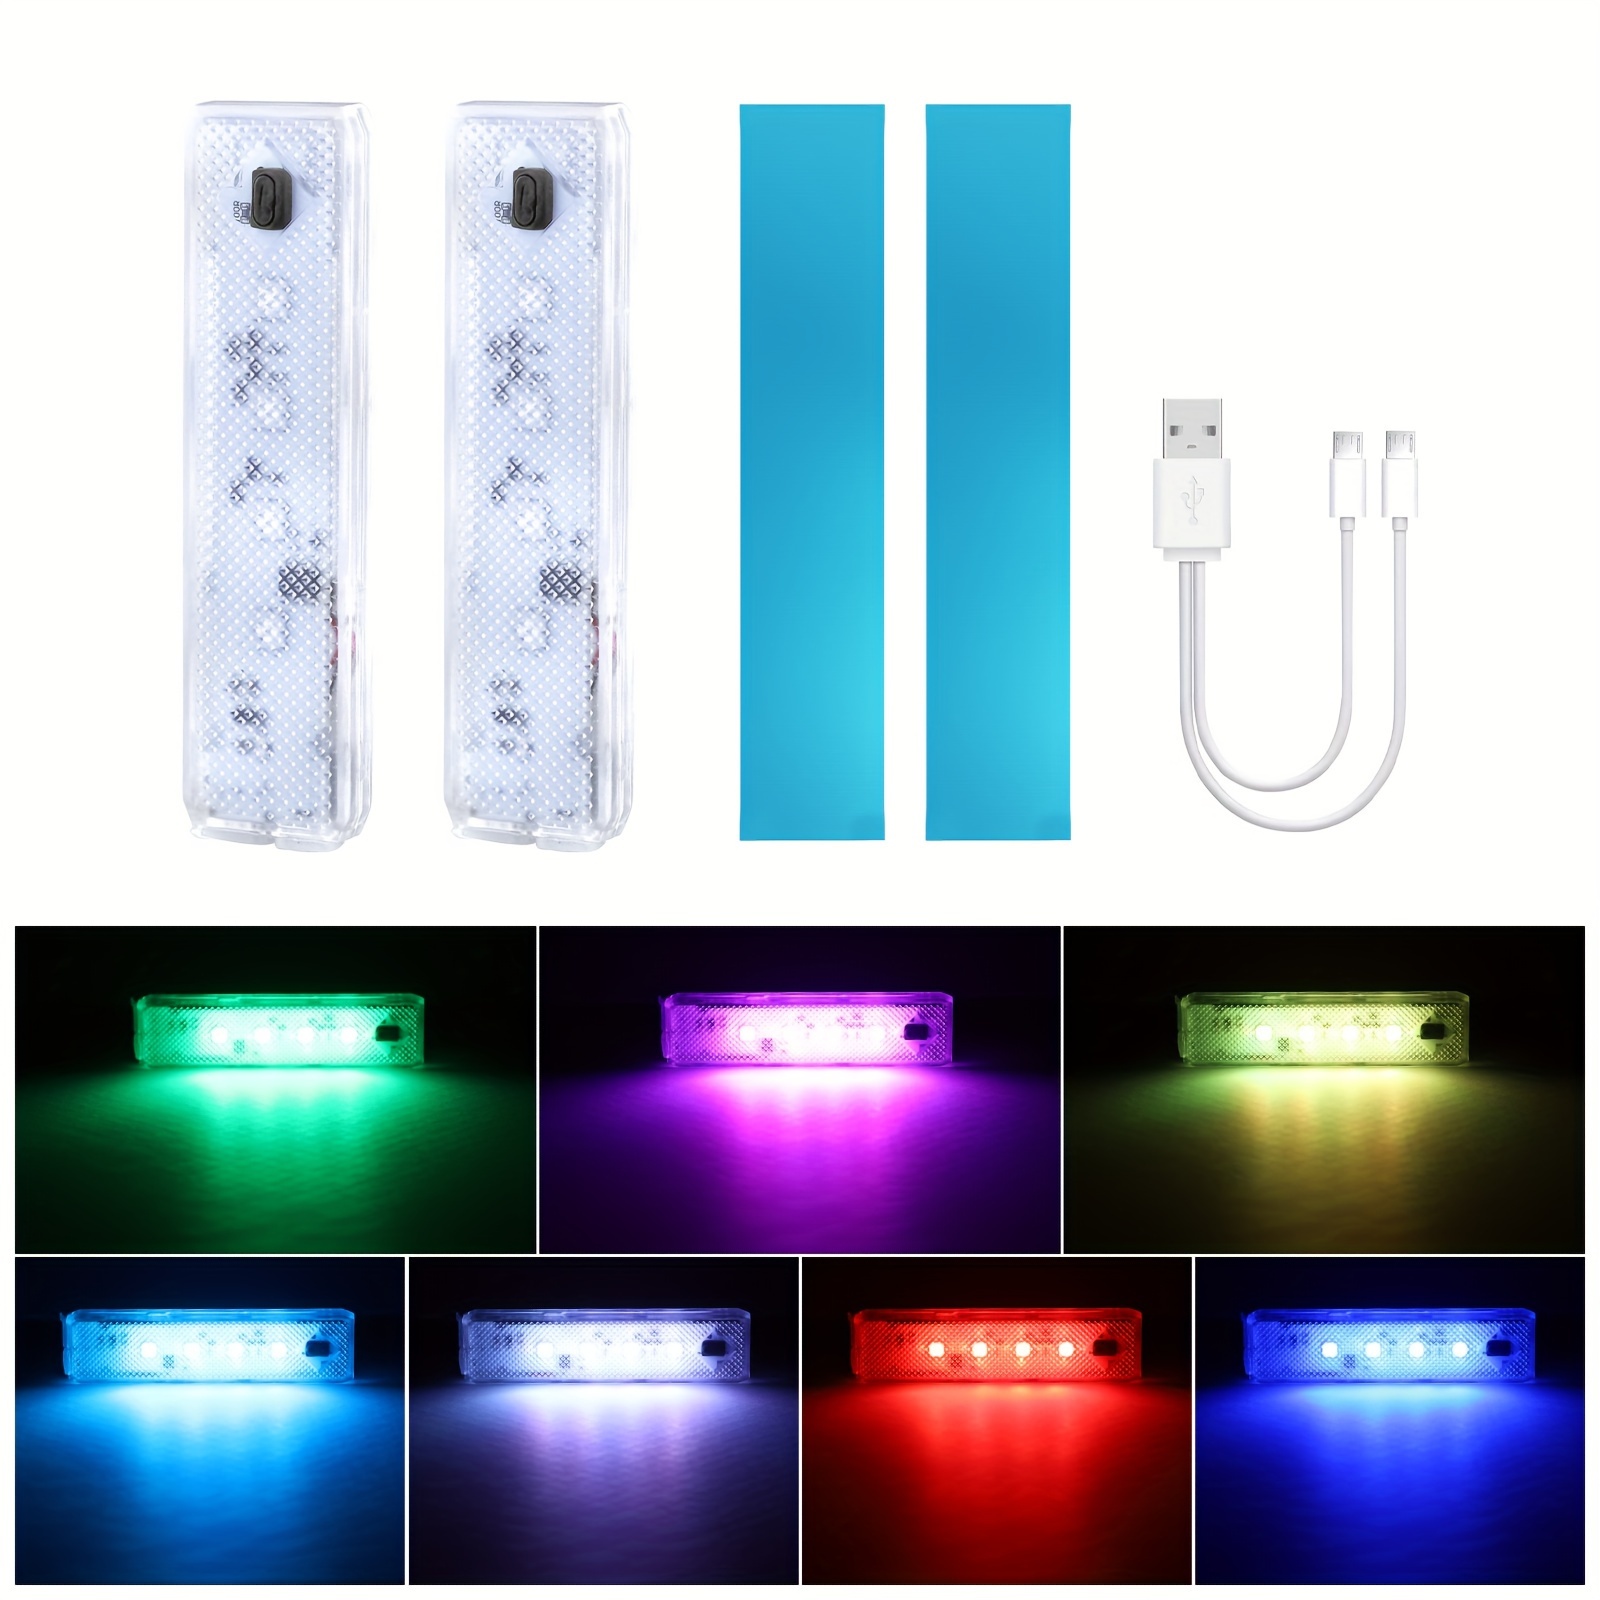 

Rechargeable Rgb Led Car Door Lights - Magnetic, Waterproof Welcome & Warning Light With Auto Shut-off, Usb Charging